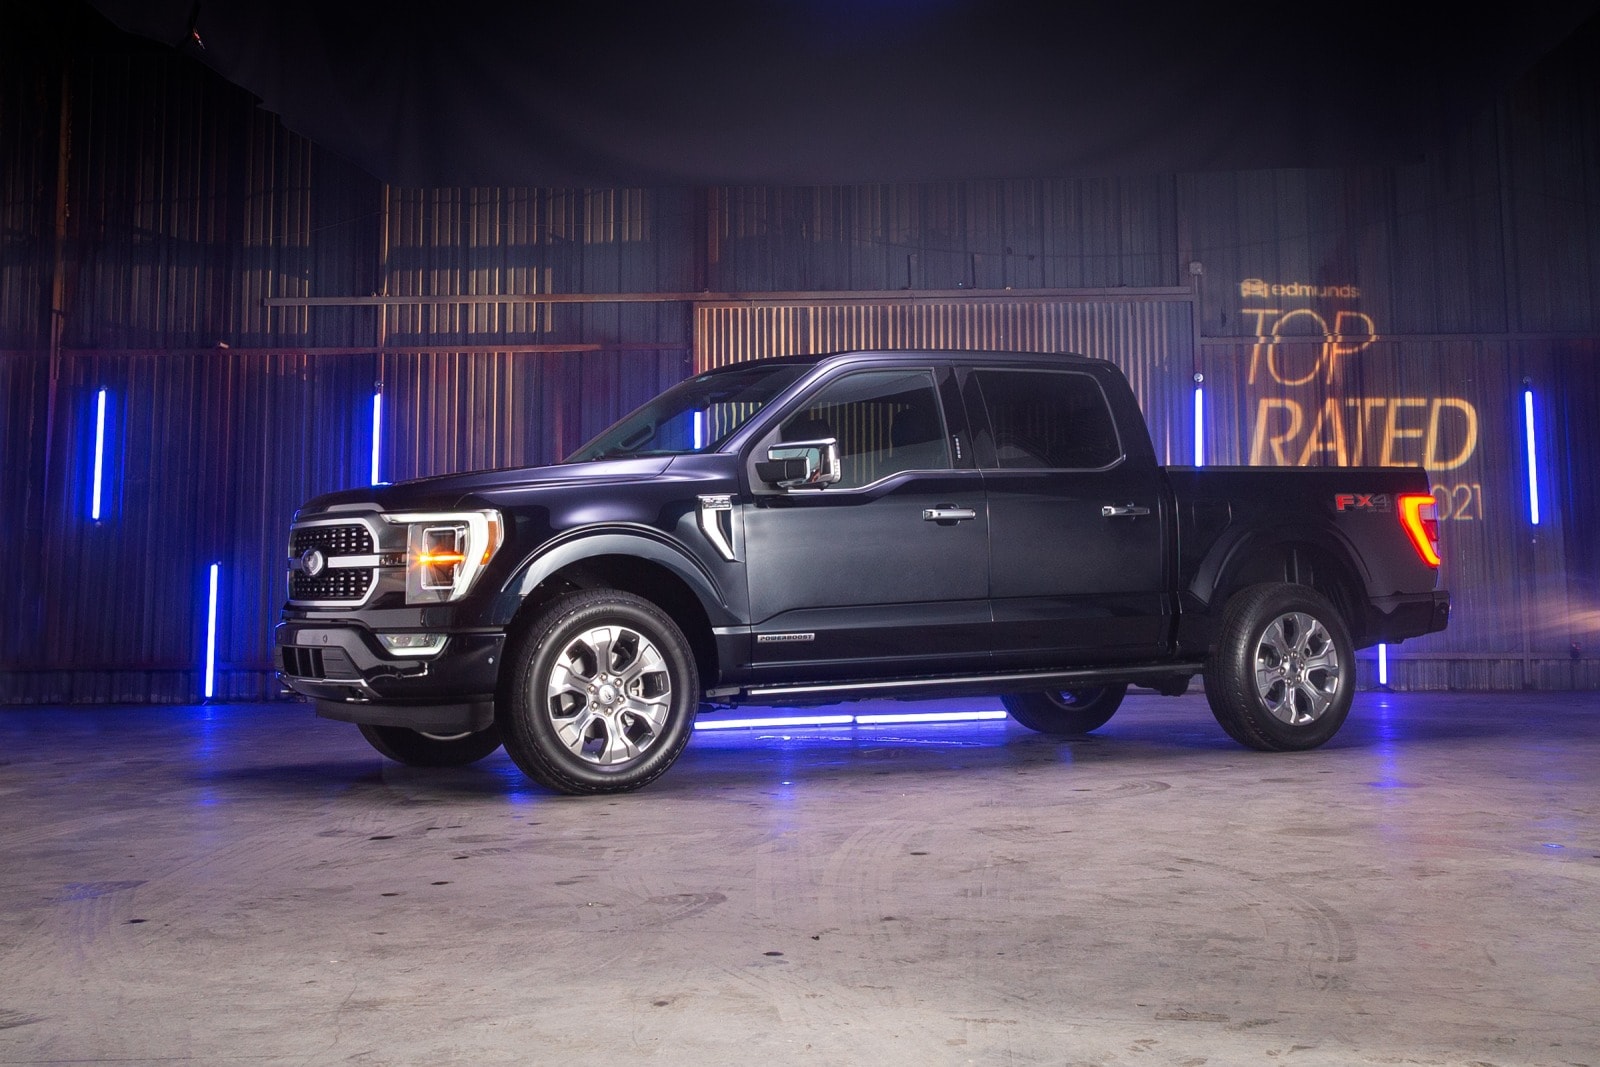 2021 Ford F-150: Edmunds Top Rated Truck | Edmunds Top Rated Awards 2021